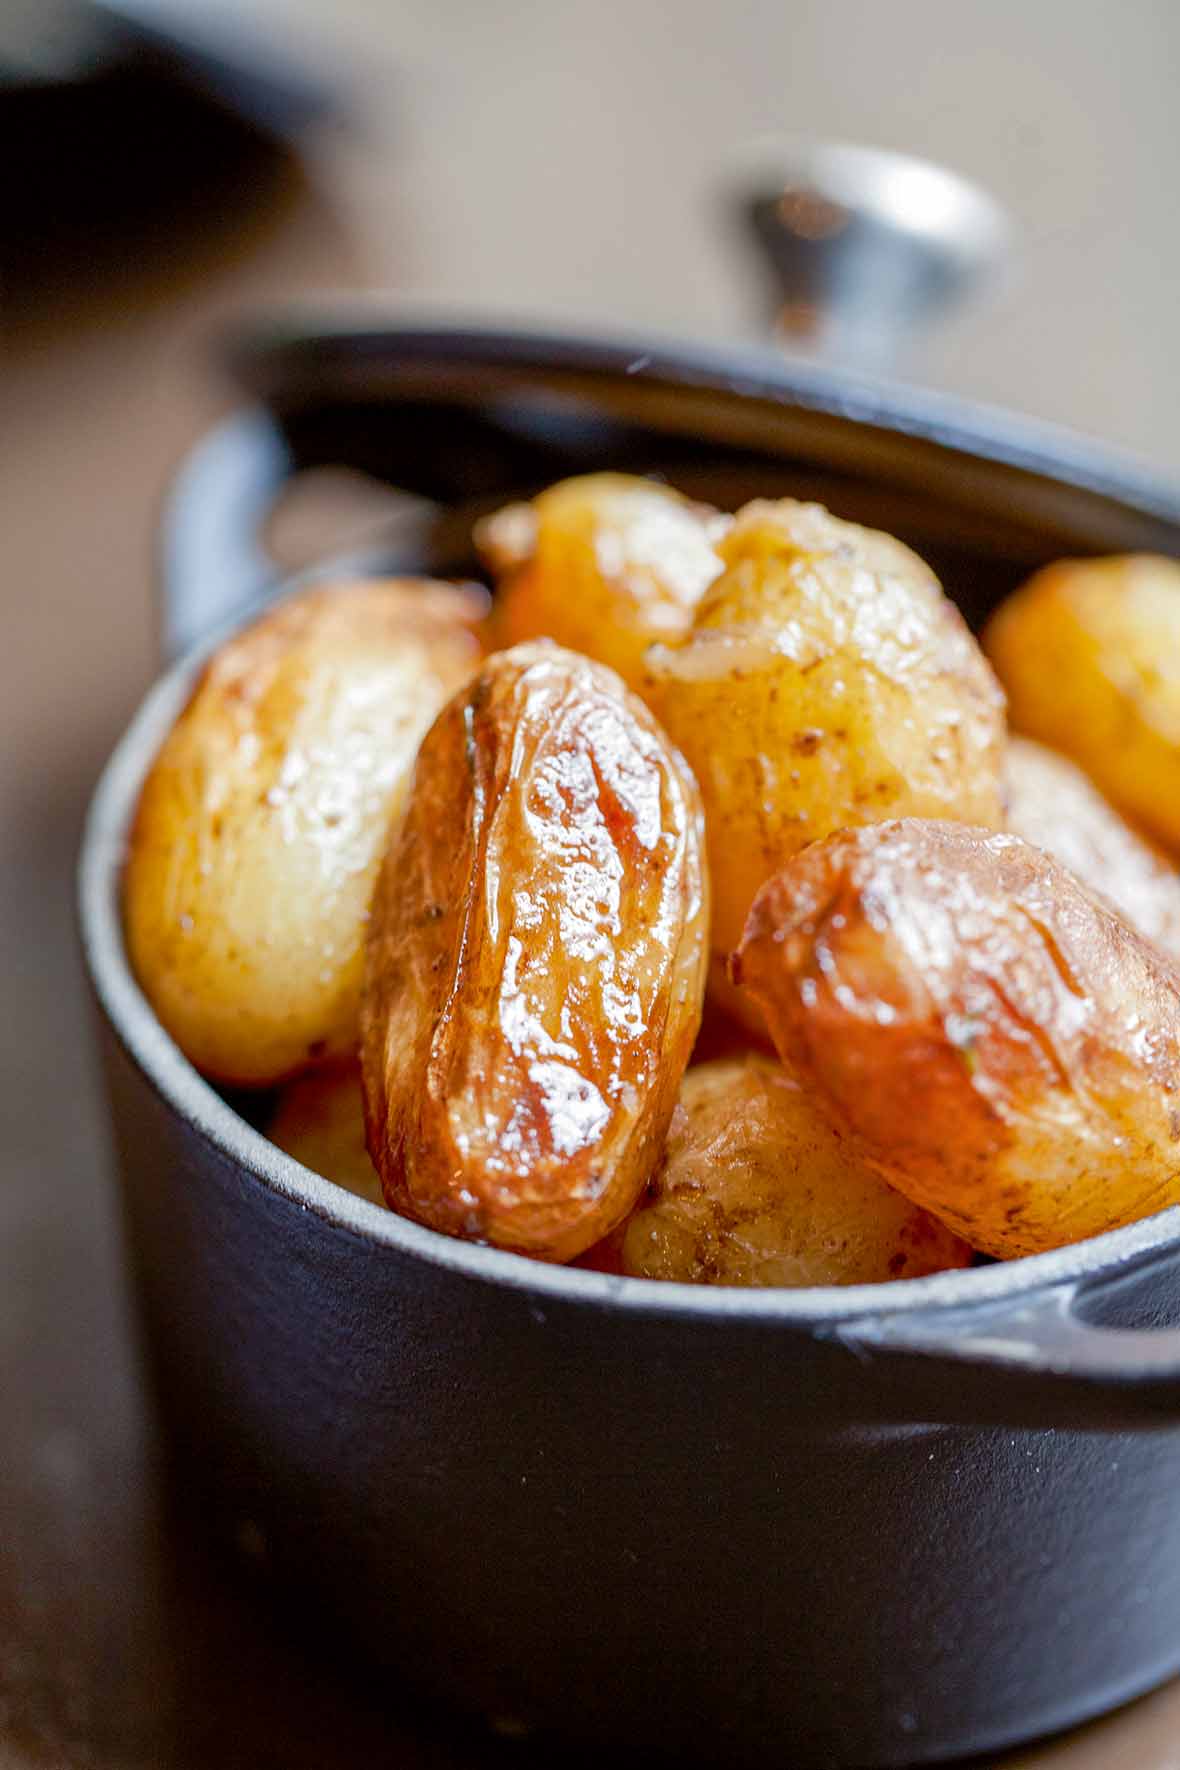 Cast iron pot with braised new potatoes inside.